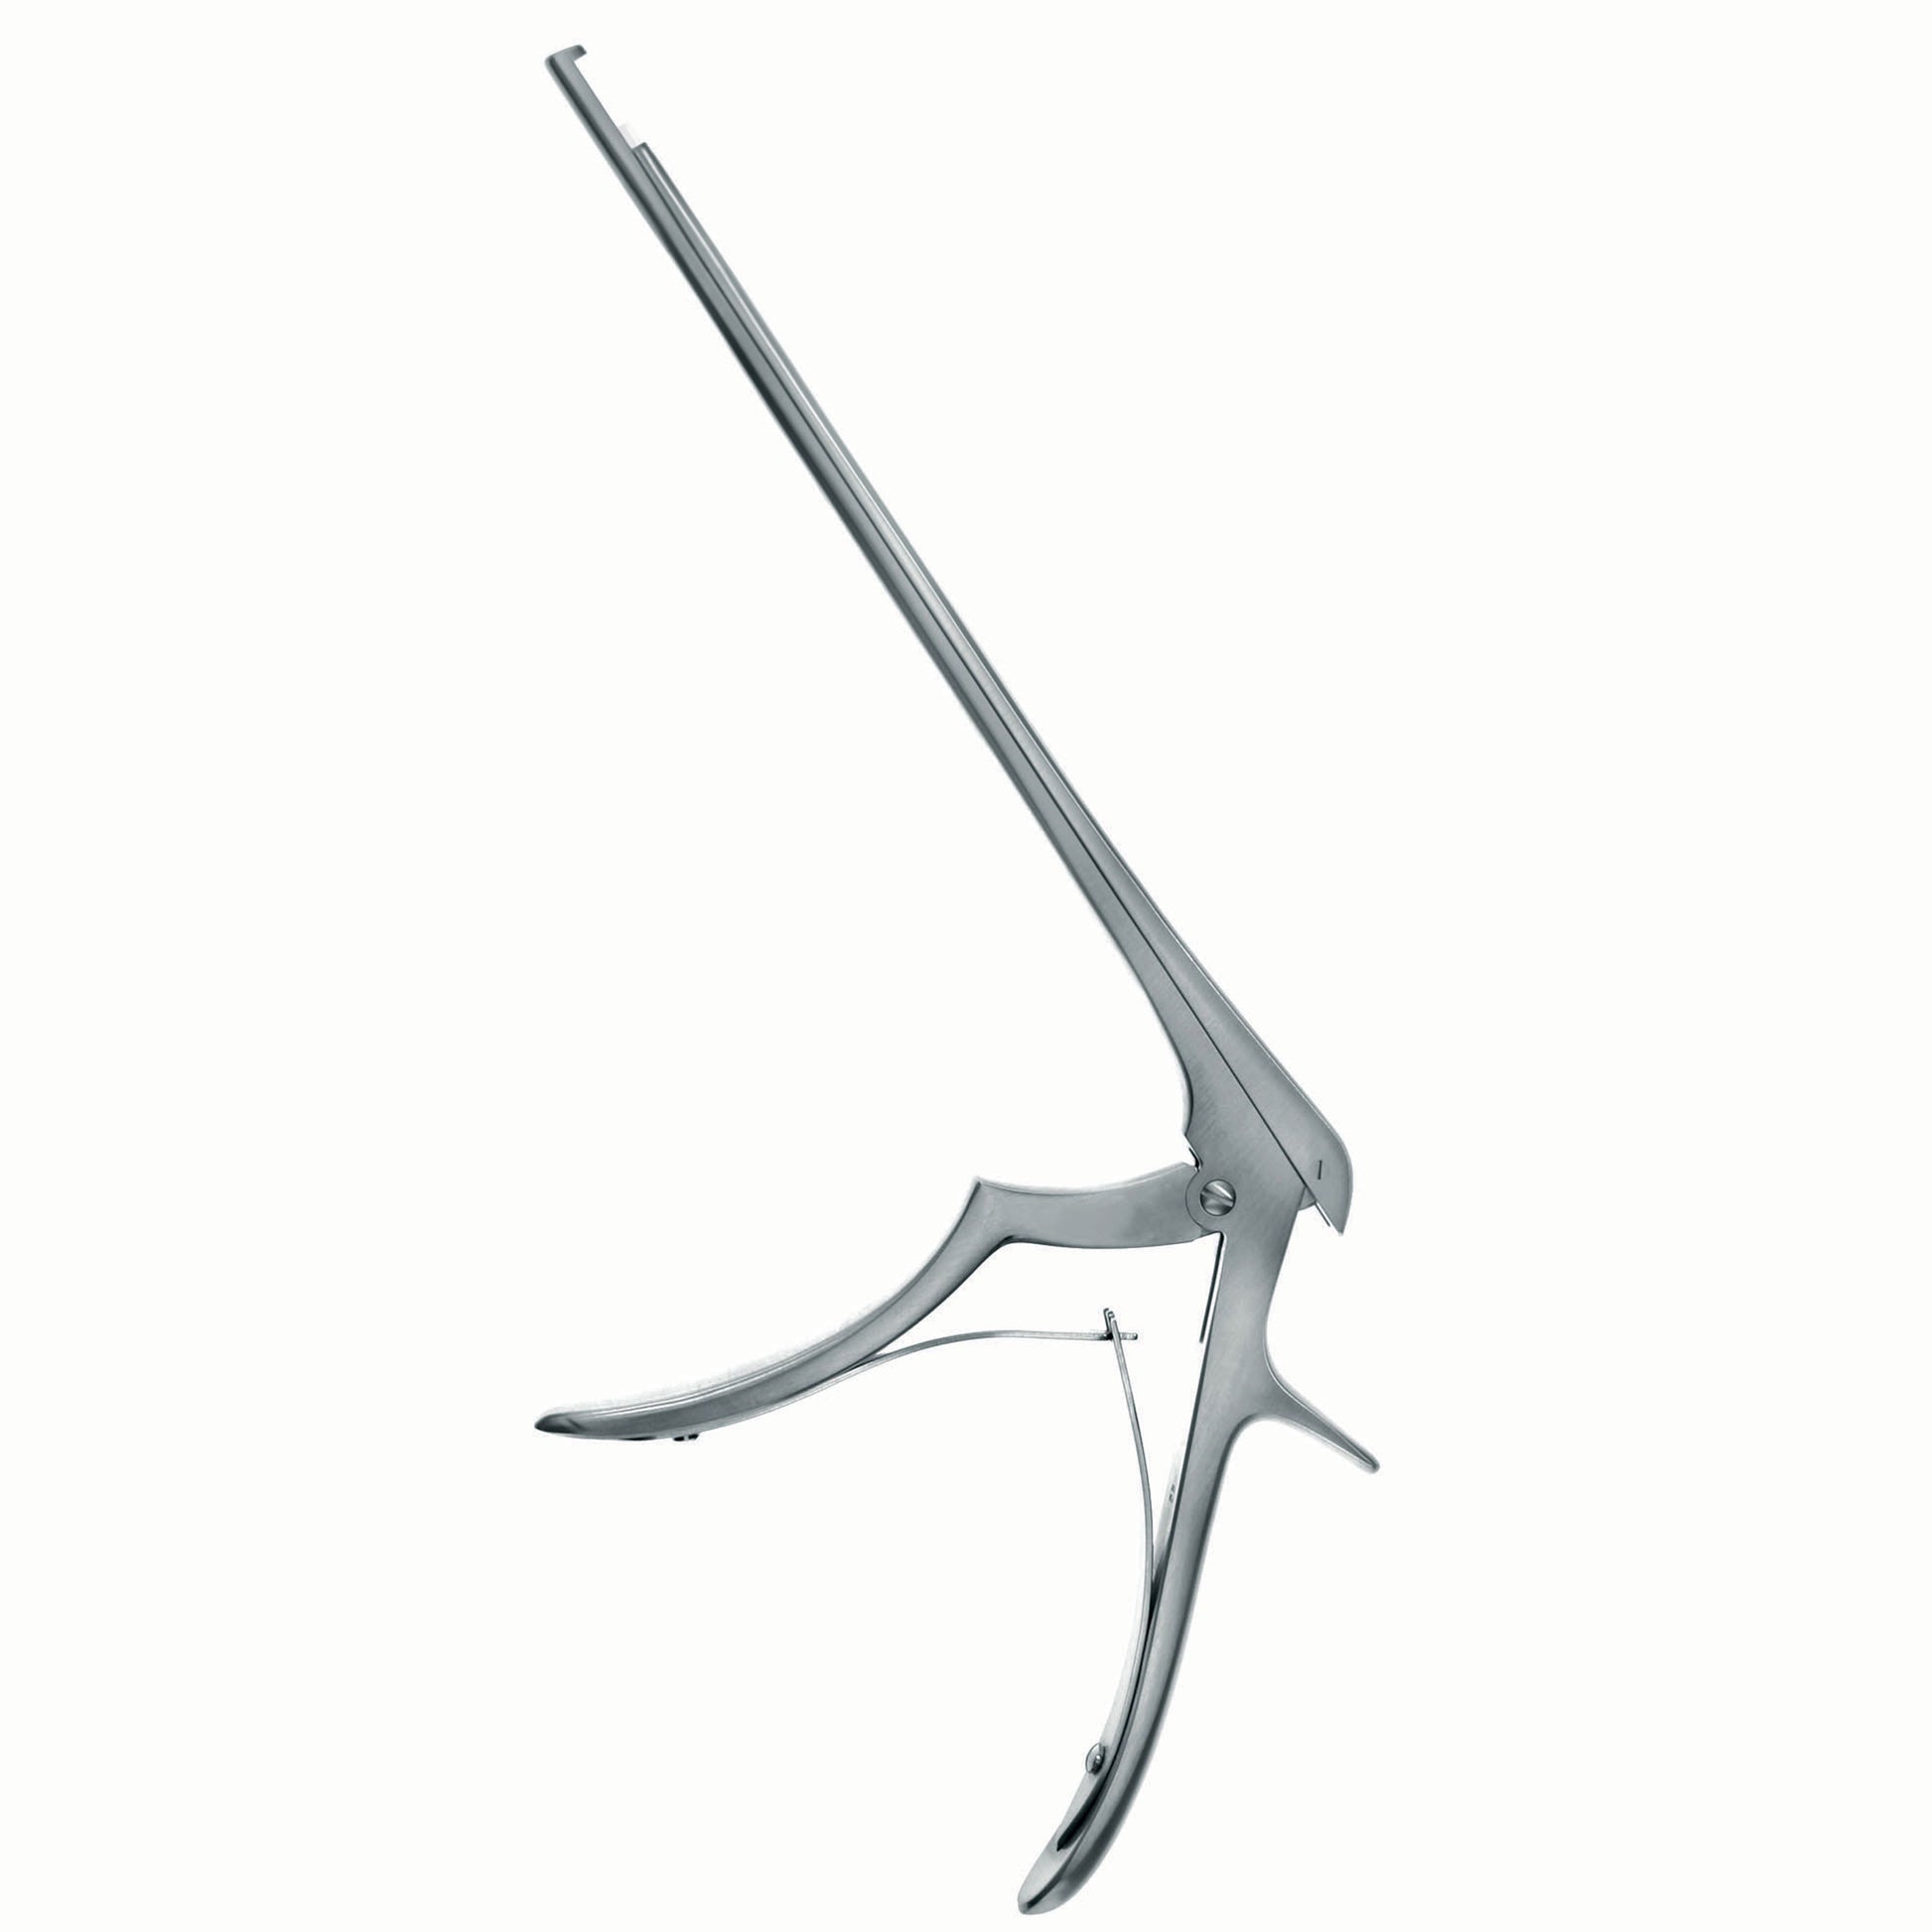 MICRO CUP FORCEPS 8"( 200mm) 2mm UP